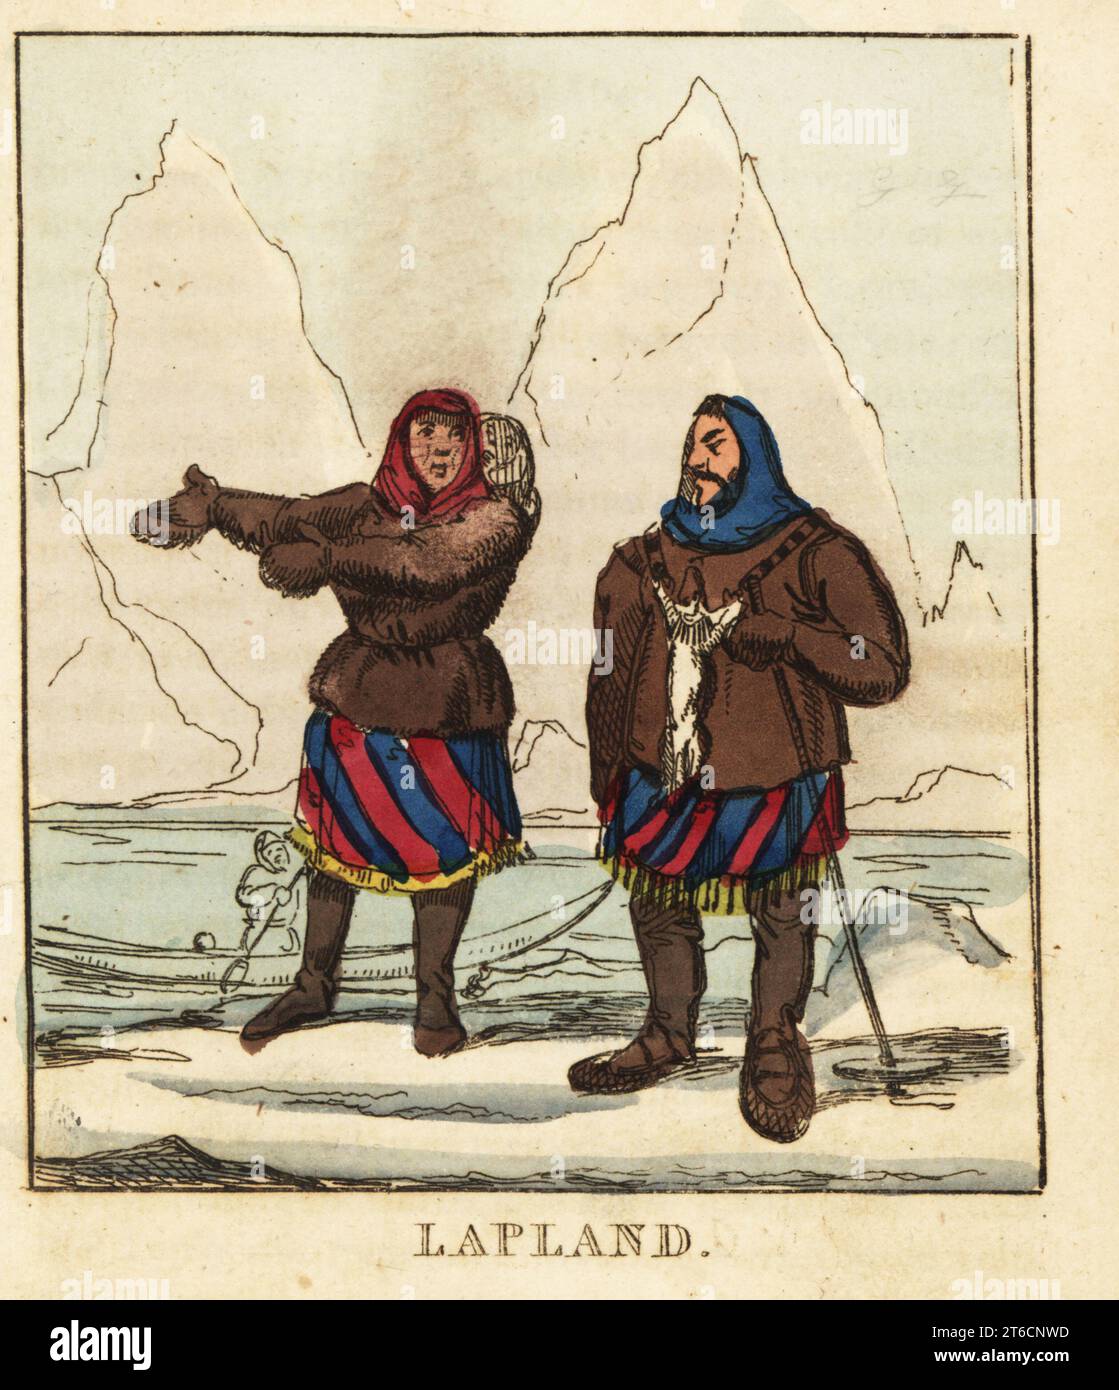 Costumes of the Sami people of Lapland, 19th century. A family standing on an ice floe in front of a kayak. They wear hooded suits, gloves and boots made of reindeer-skin with striped skirts. Handcoloured copperplate engraving from The World in Miniature, or Panorama of the Costumes, Manners & Customs of All Nations, John Bysh, London, 1825. Stock Photo